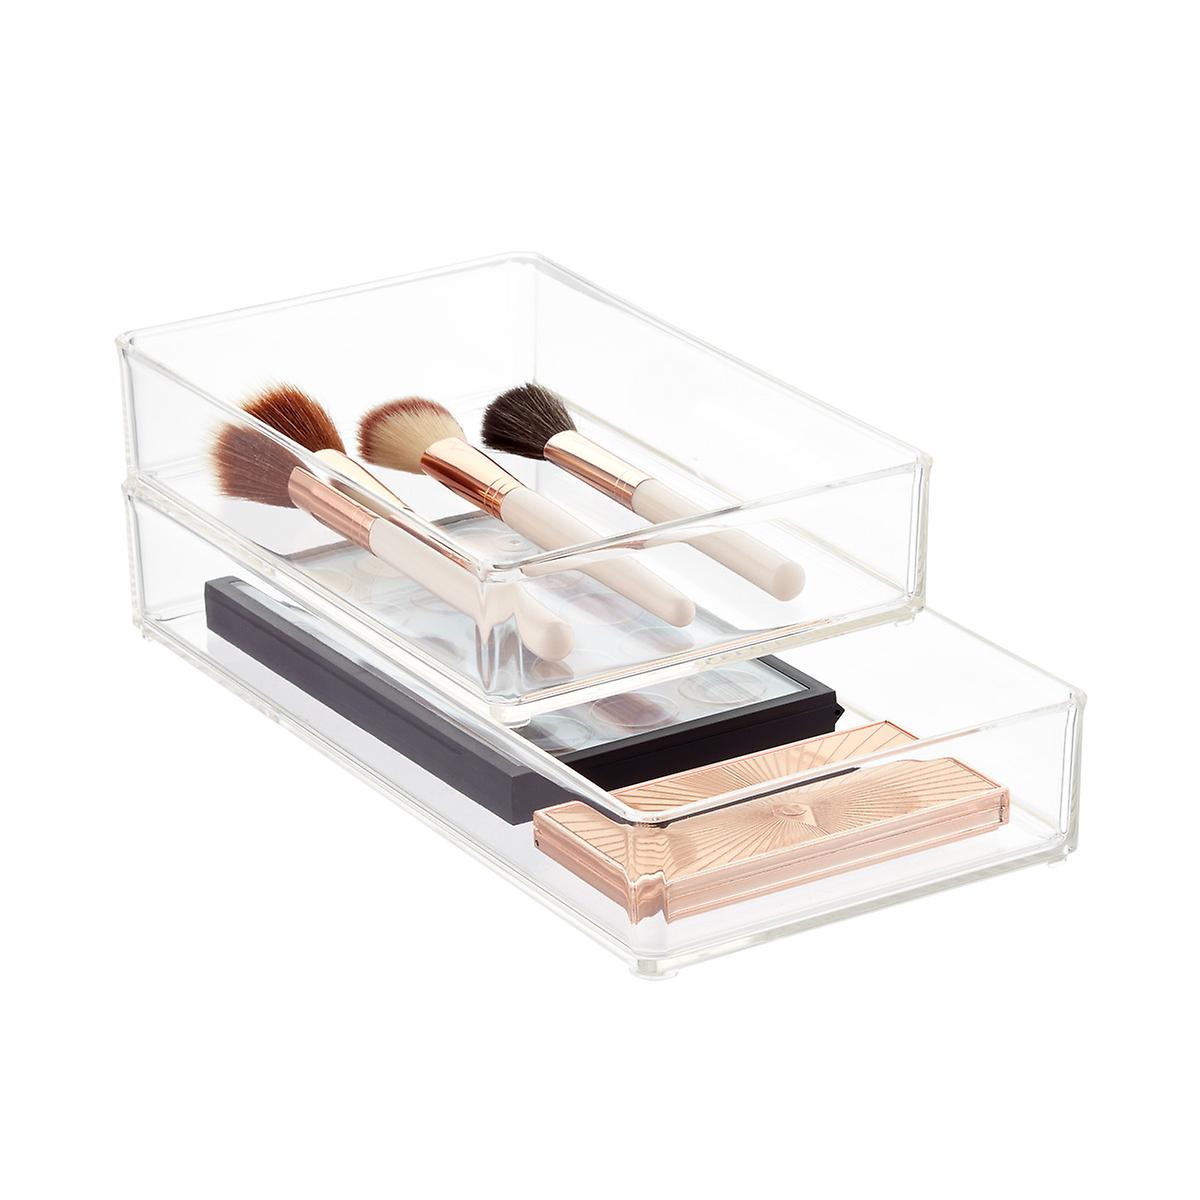 https://www.containerstore.com/catalogimages/359994/10074296g-stacking-drawer-organizer-.jpg